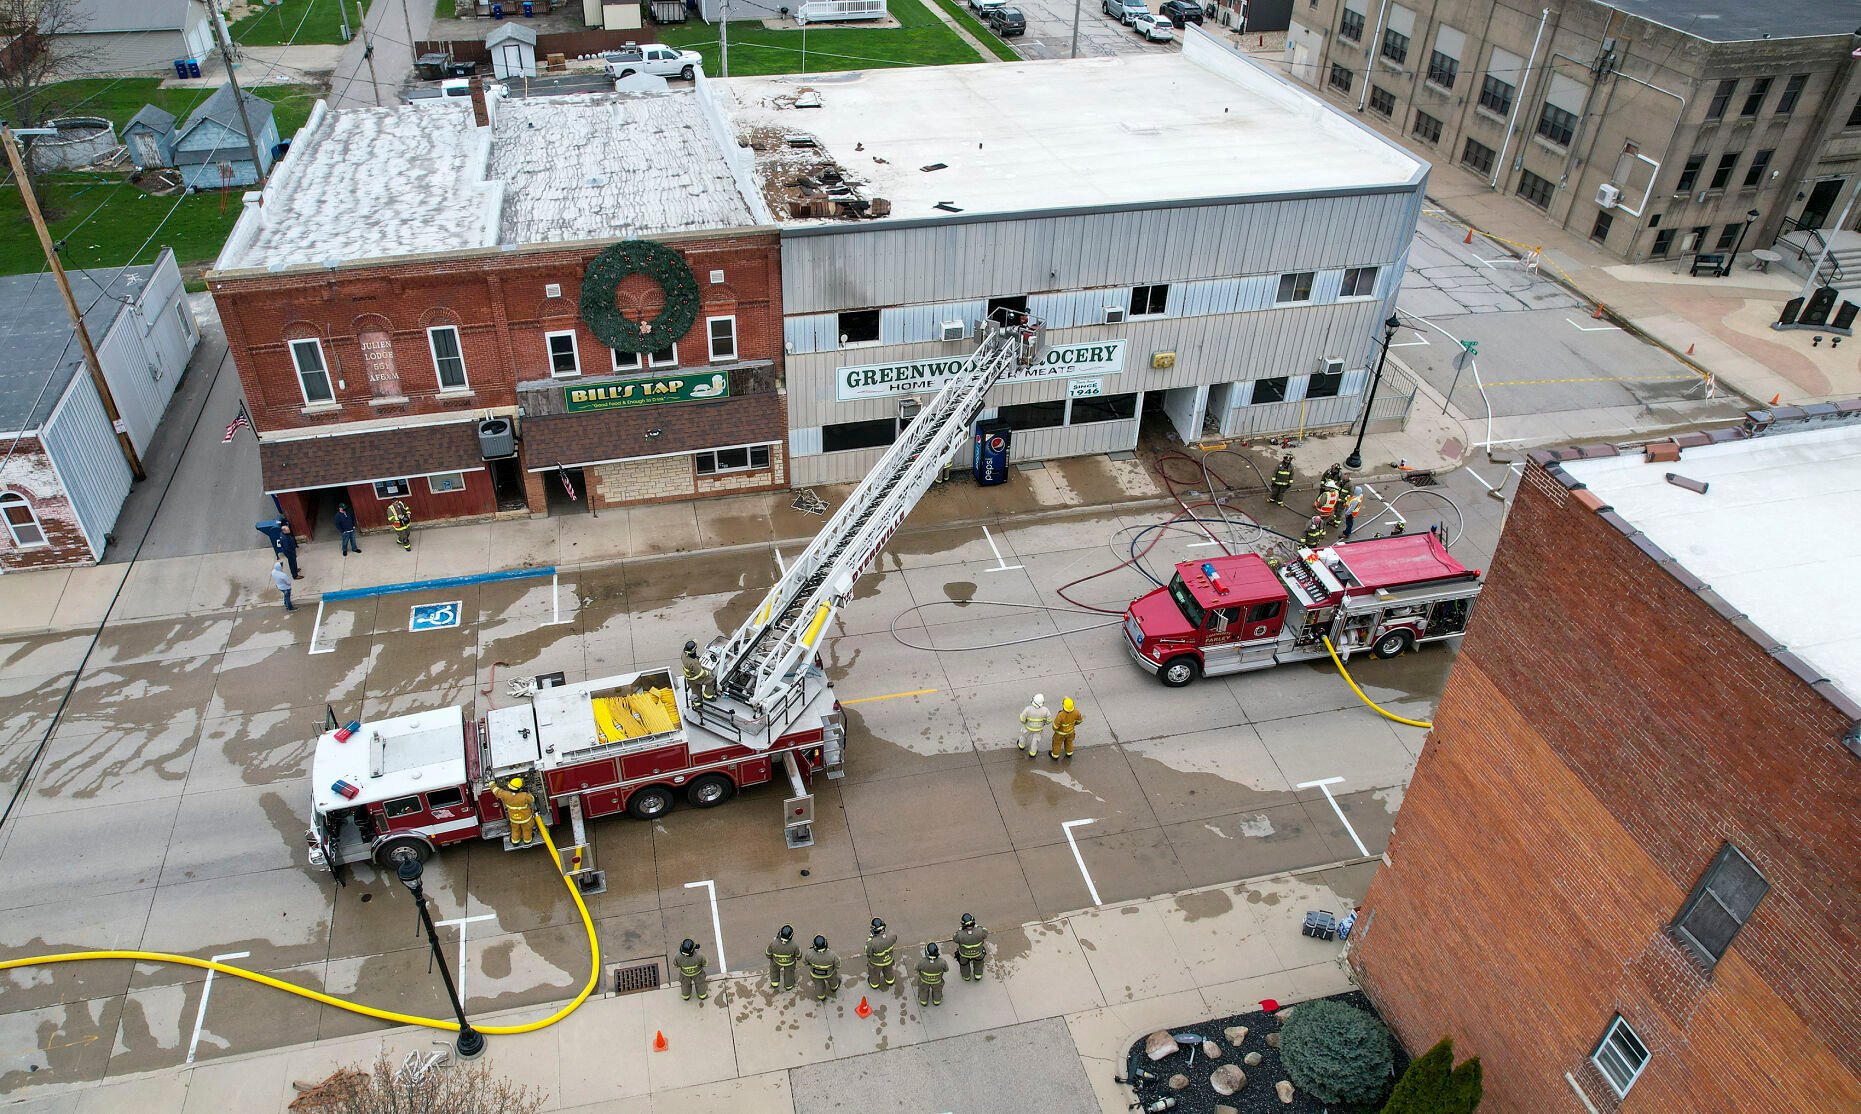 Multiple fire departments secure the scene of a blaze that occurred at Greenwood’s Grocery in Farley, Iowa, on May 6.    PHOTO CREDIT: Dave Kettering